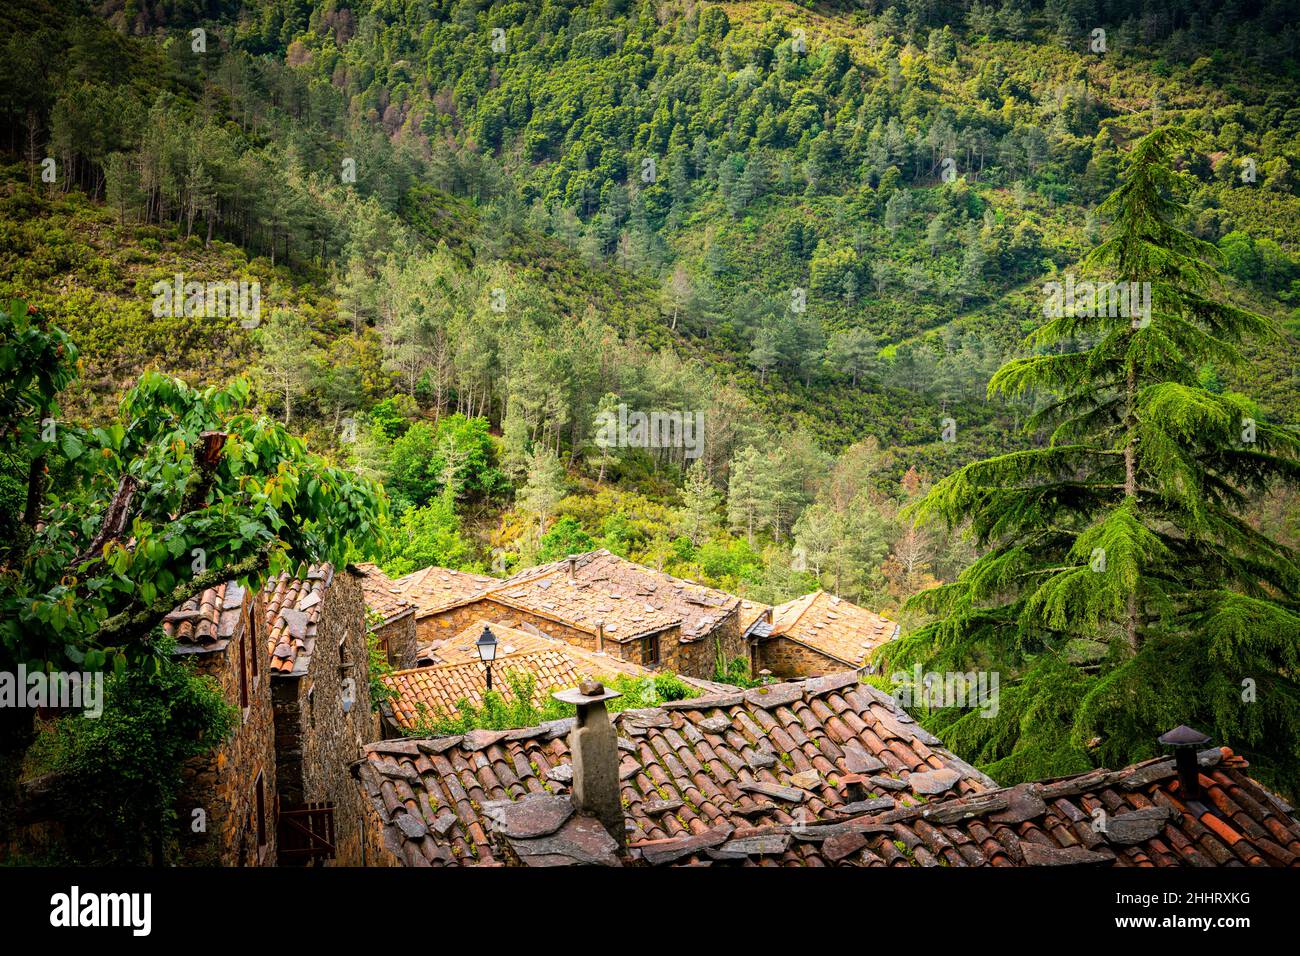 Stone houses on a forested hillside in Cerdeira, Portugal Stock Photo